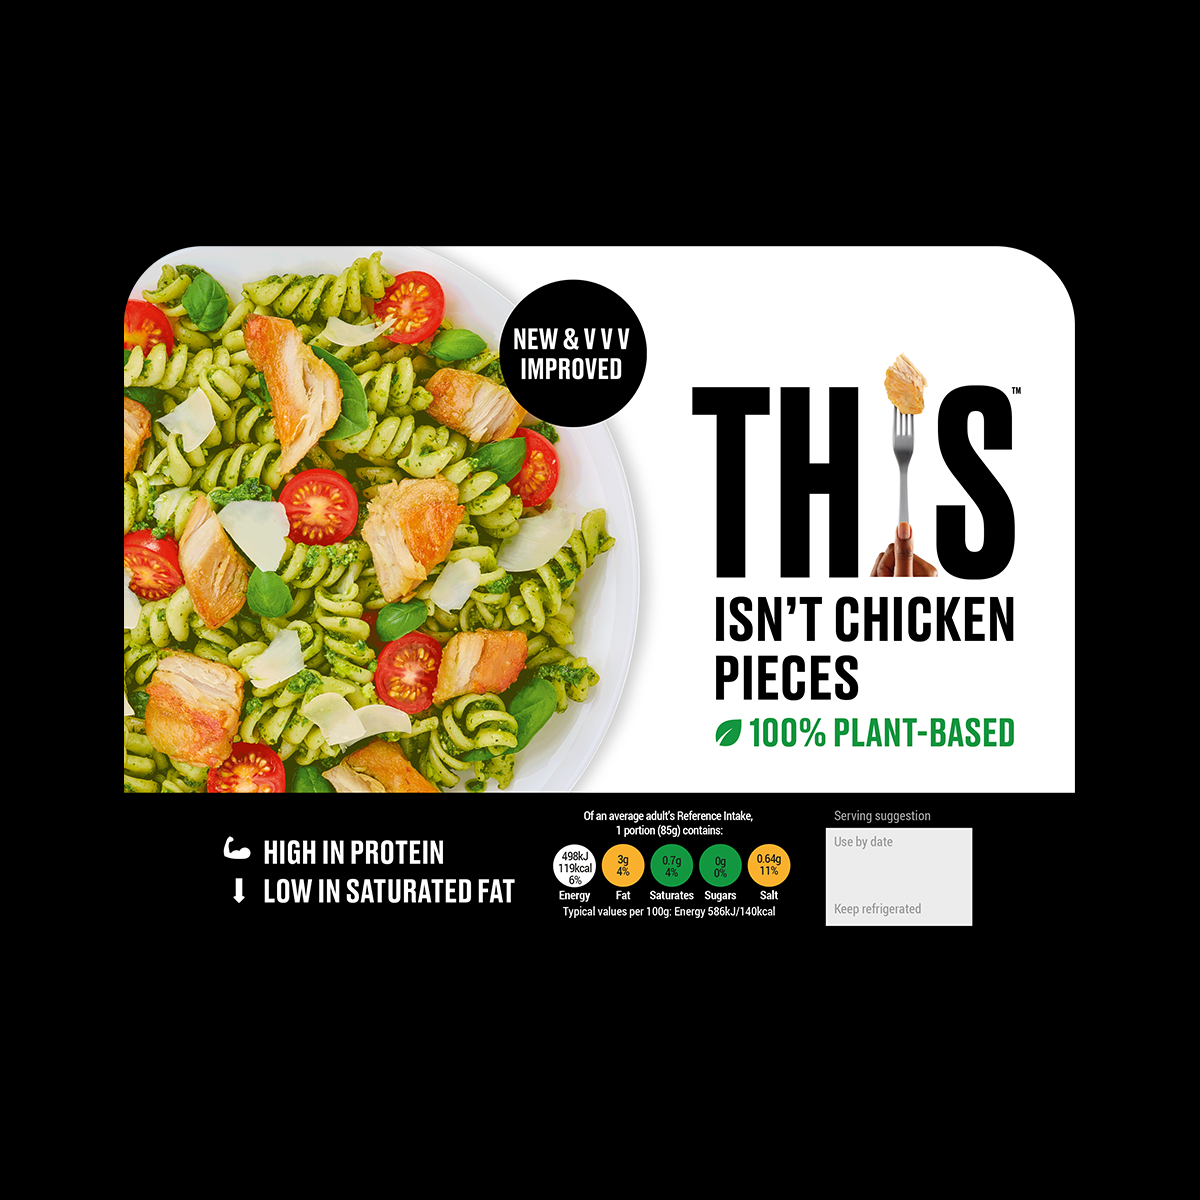 Plant-based & vegan alternative to chicken pieces from THIS with nutritional information.